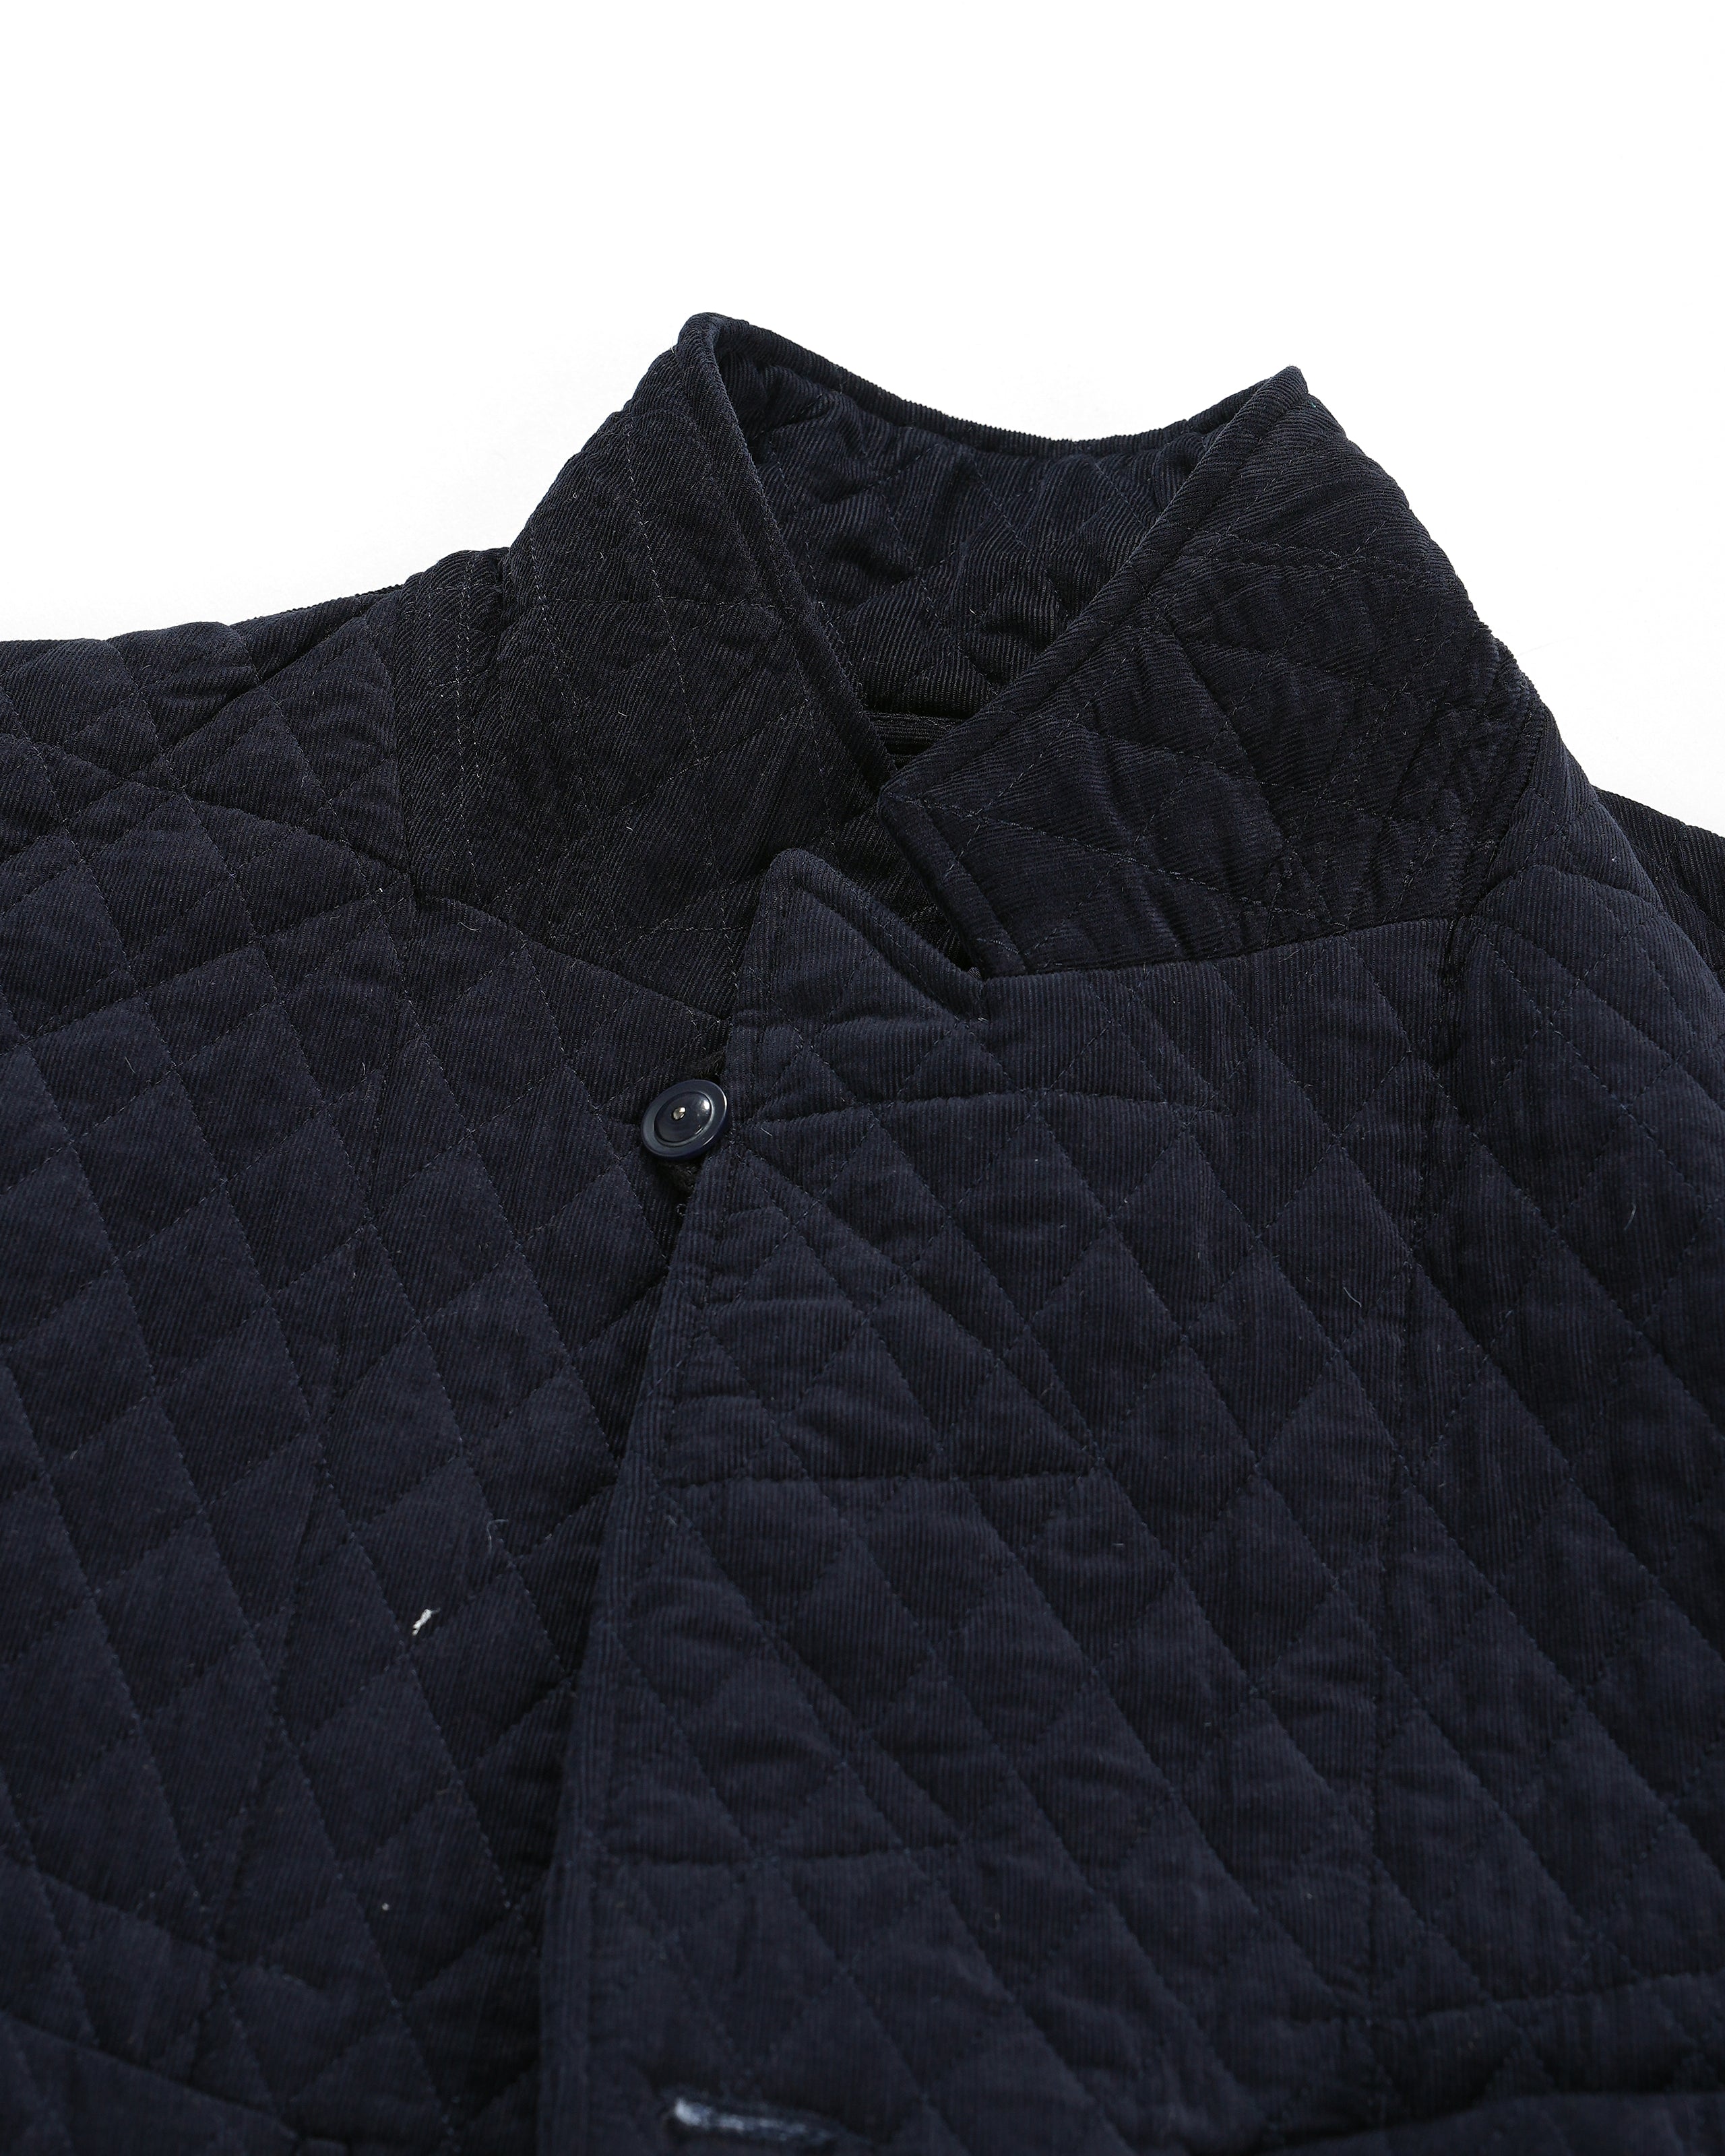 Bedford Jacket - Dk. Navy CP Quilted Corduroy